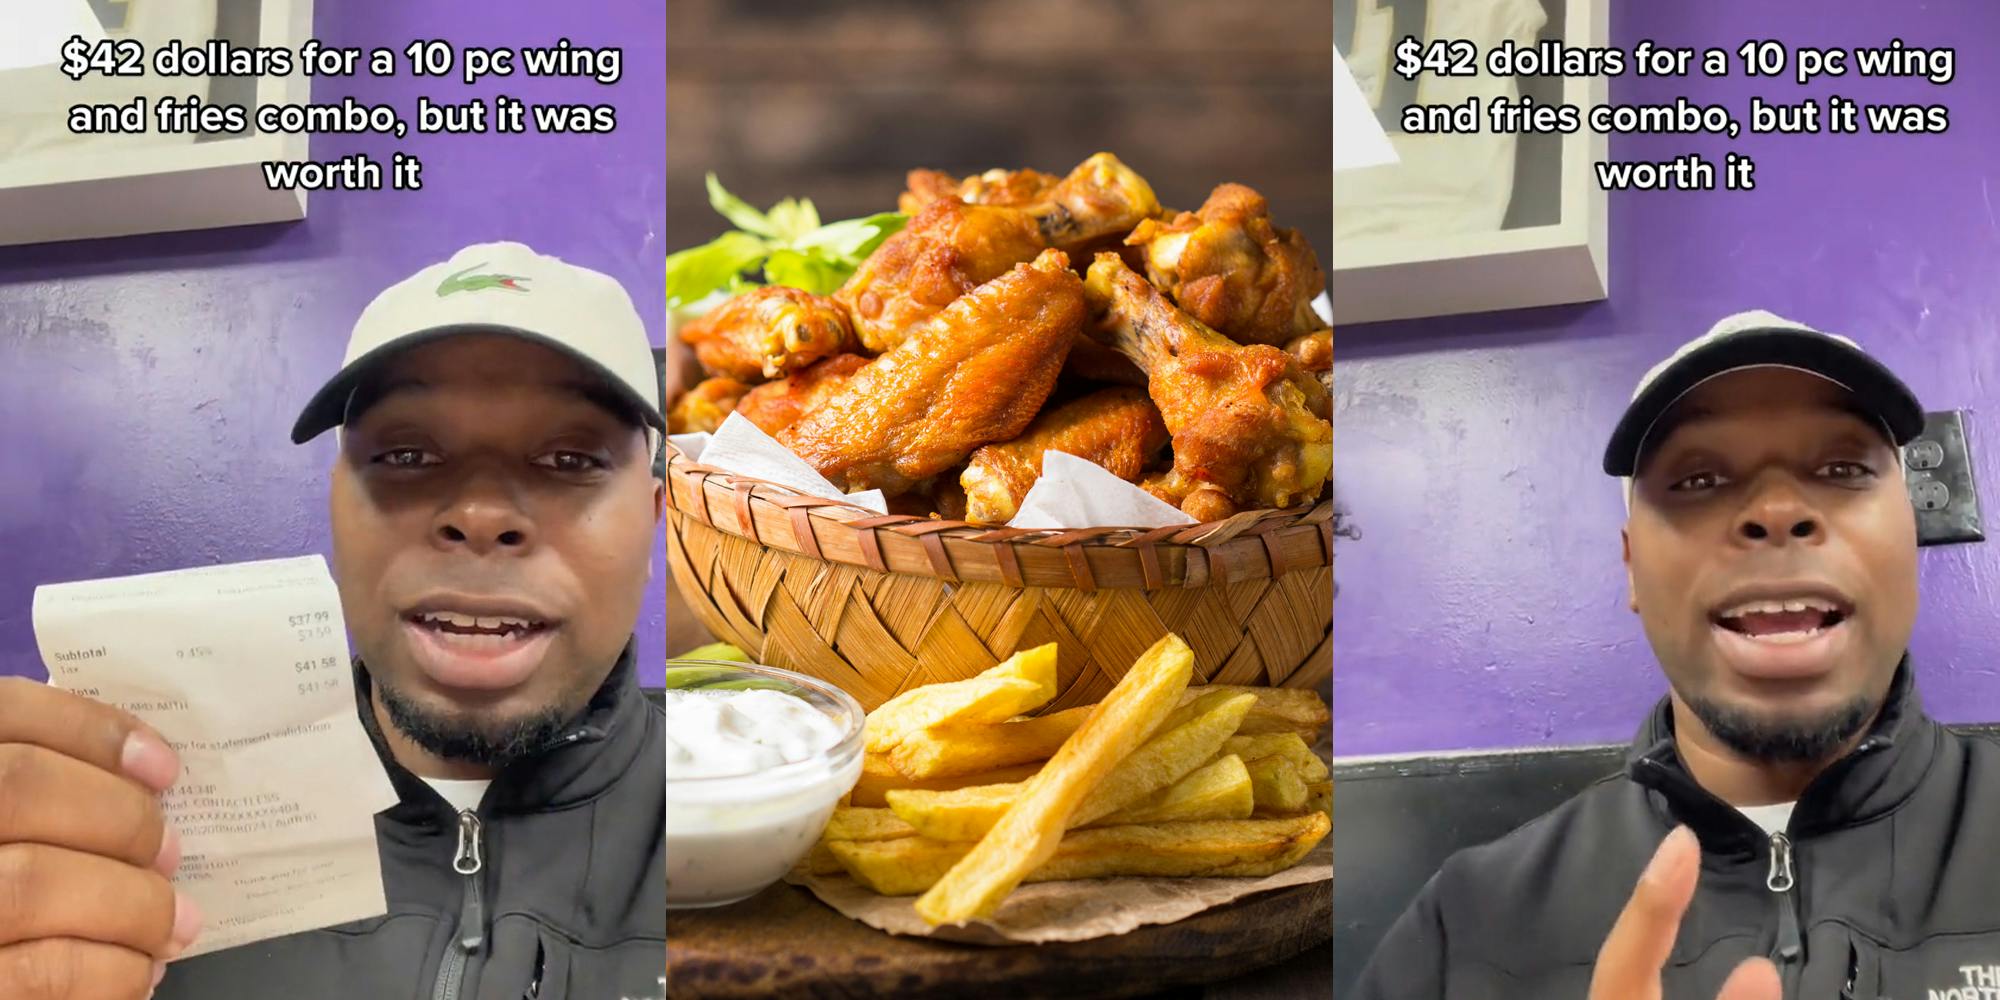 customer holding receipt with caption "$42 dollars for a 10 pc wing and fries combo, but it was worth it" (l) wings and fries on wooden surface (c) customer speaking caption "$42 dollars for a 10 pc wing and fries combo, but it was worth it" (r)